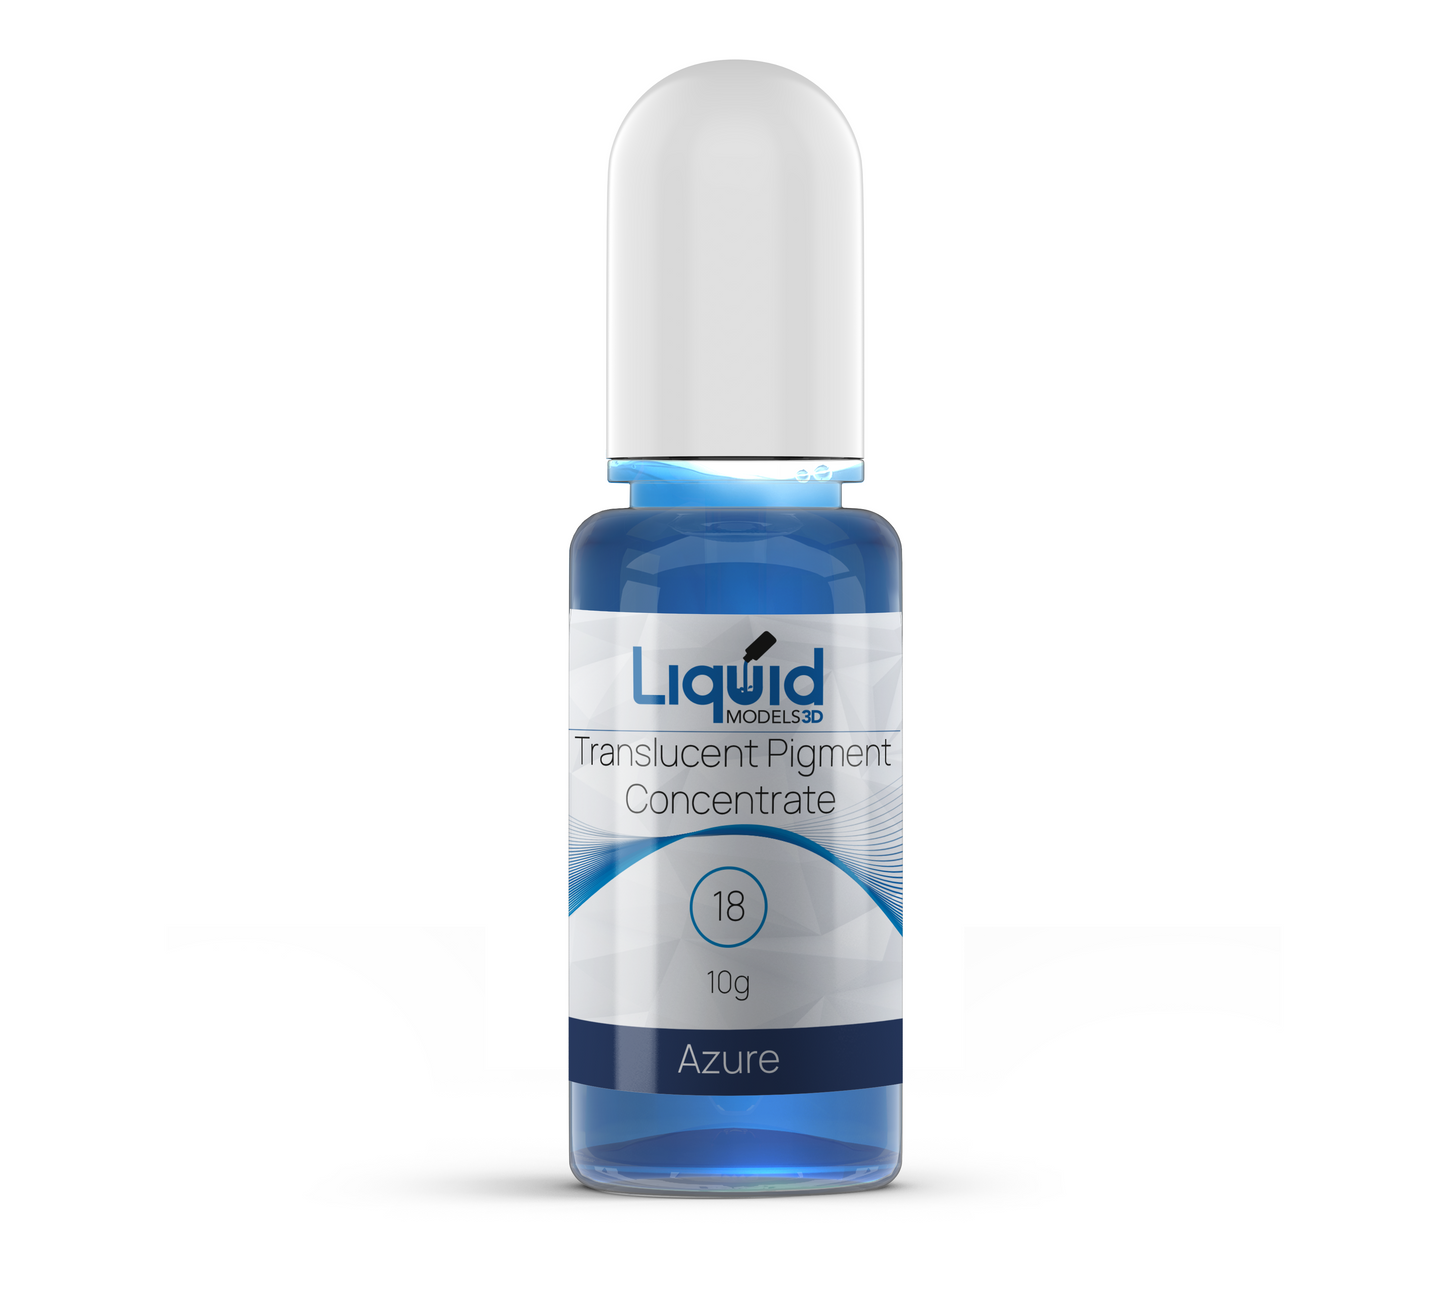 Liquid Models 3D Translucent Pigment Concentrate for Clear 3D Printing Resin 18 Azure - www.3dprintmonkey.co.uk - 1